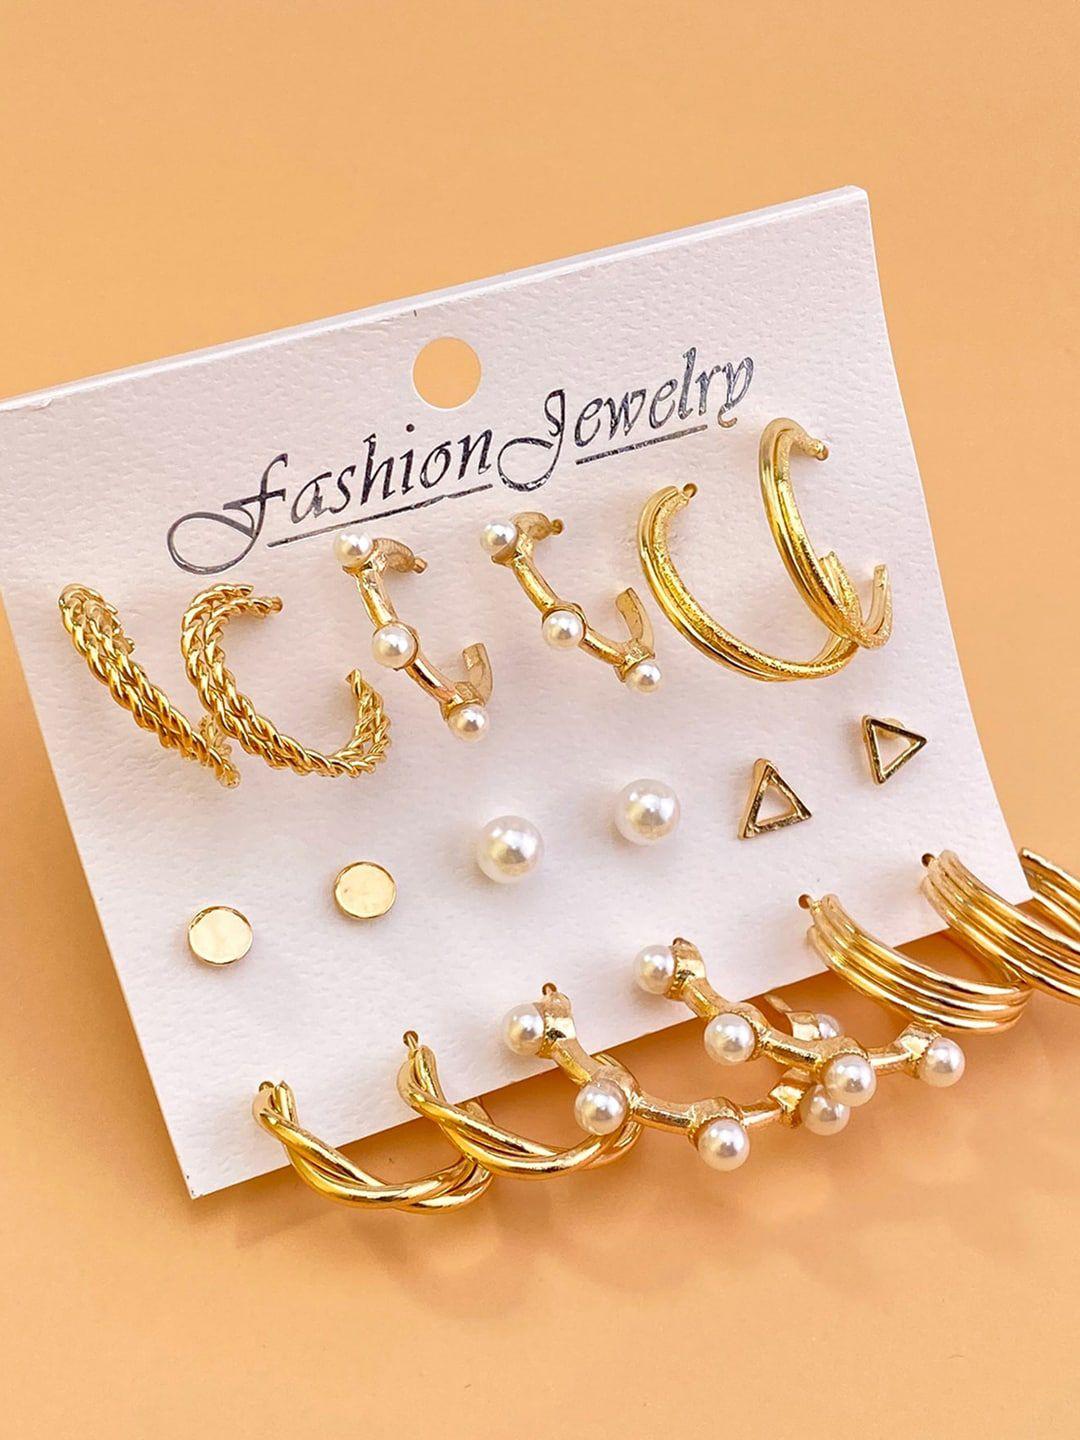 oomph set of 9 contemporary studs earrings